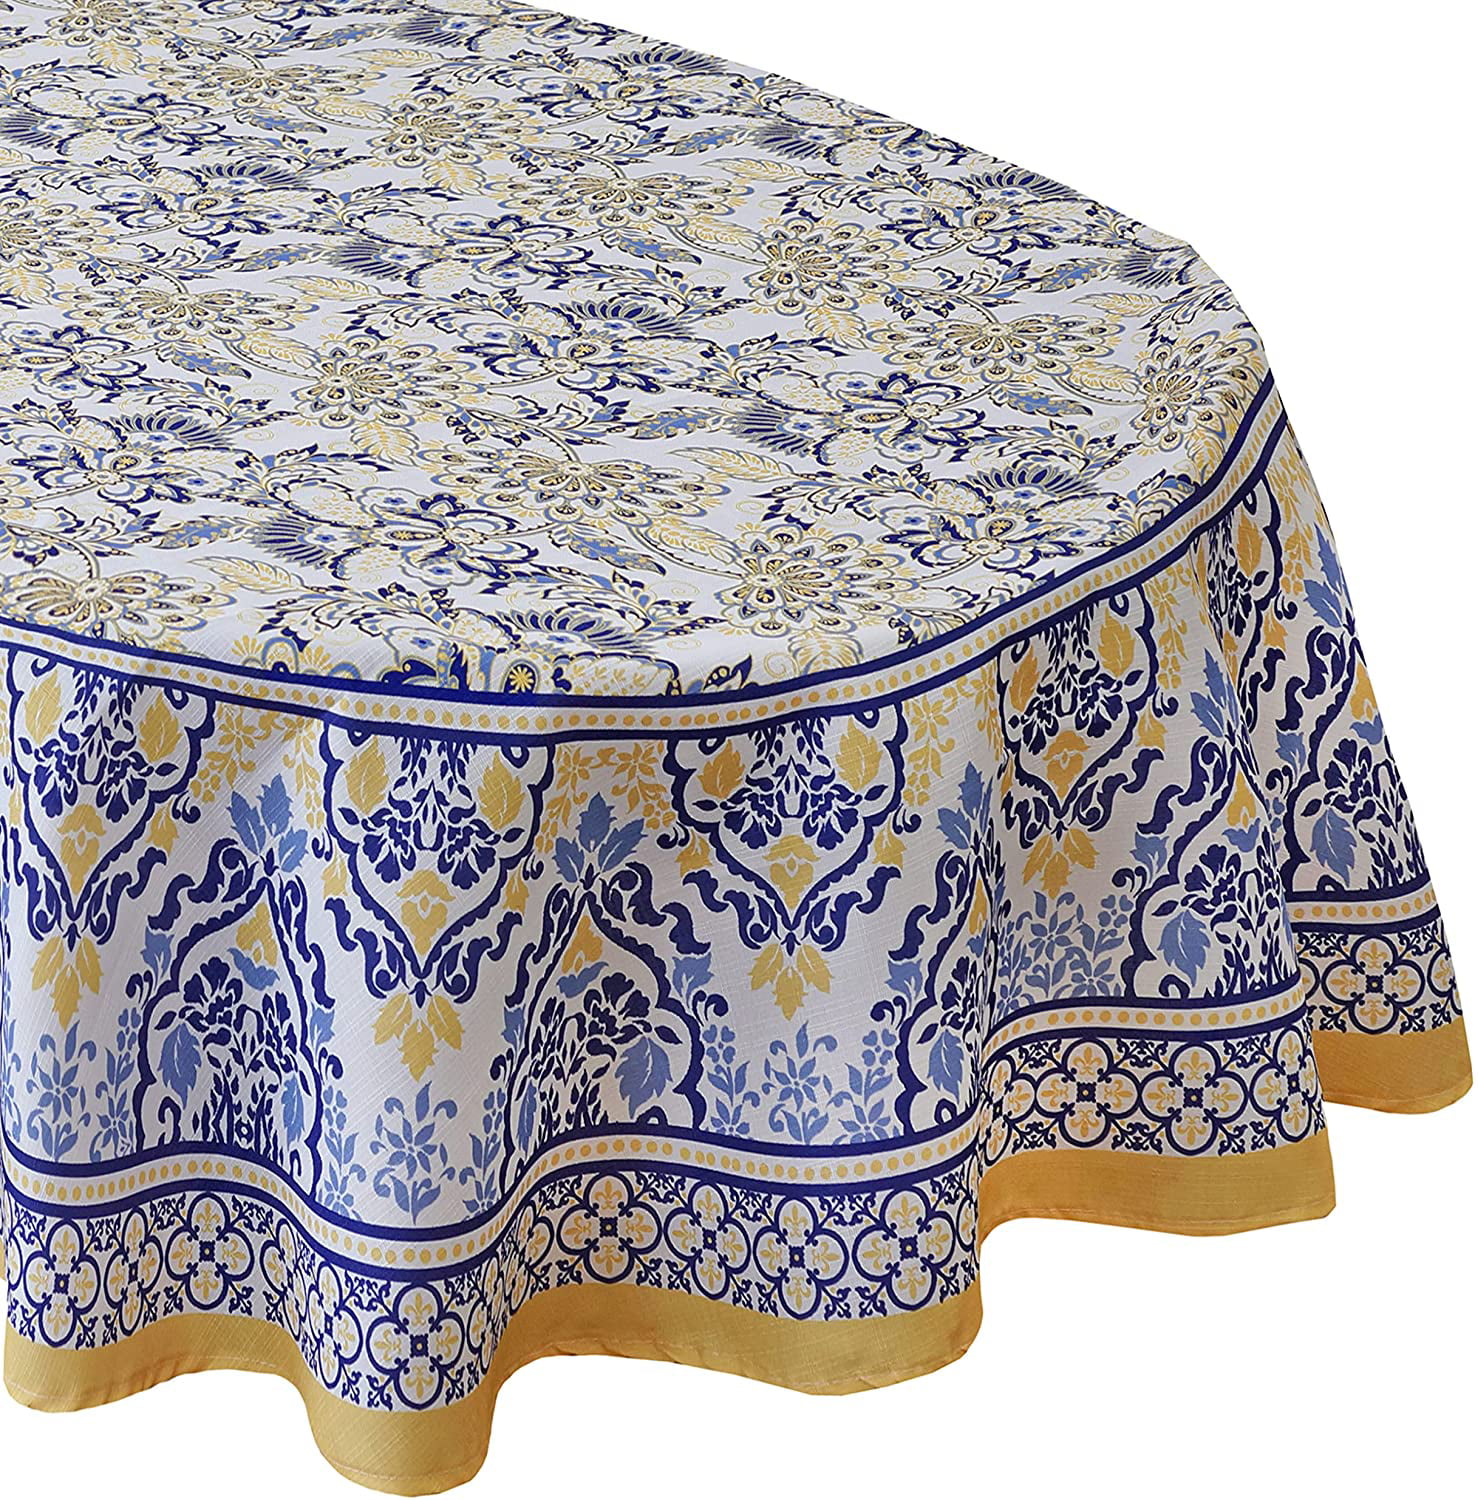 Home Bargains Plus Belle Fleur Provence Country French Fabric Placemats, Stain and Water Resistant, Wrinkle Free Floral Paisley Tablecloth, Wrinkle